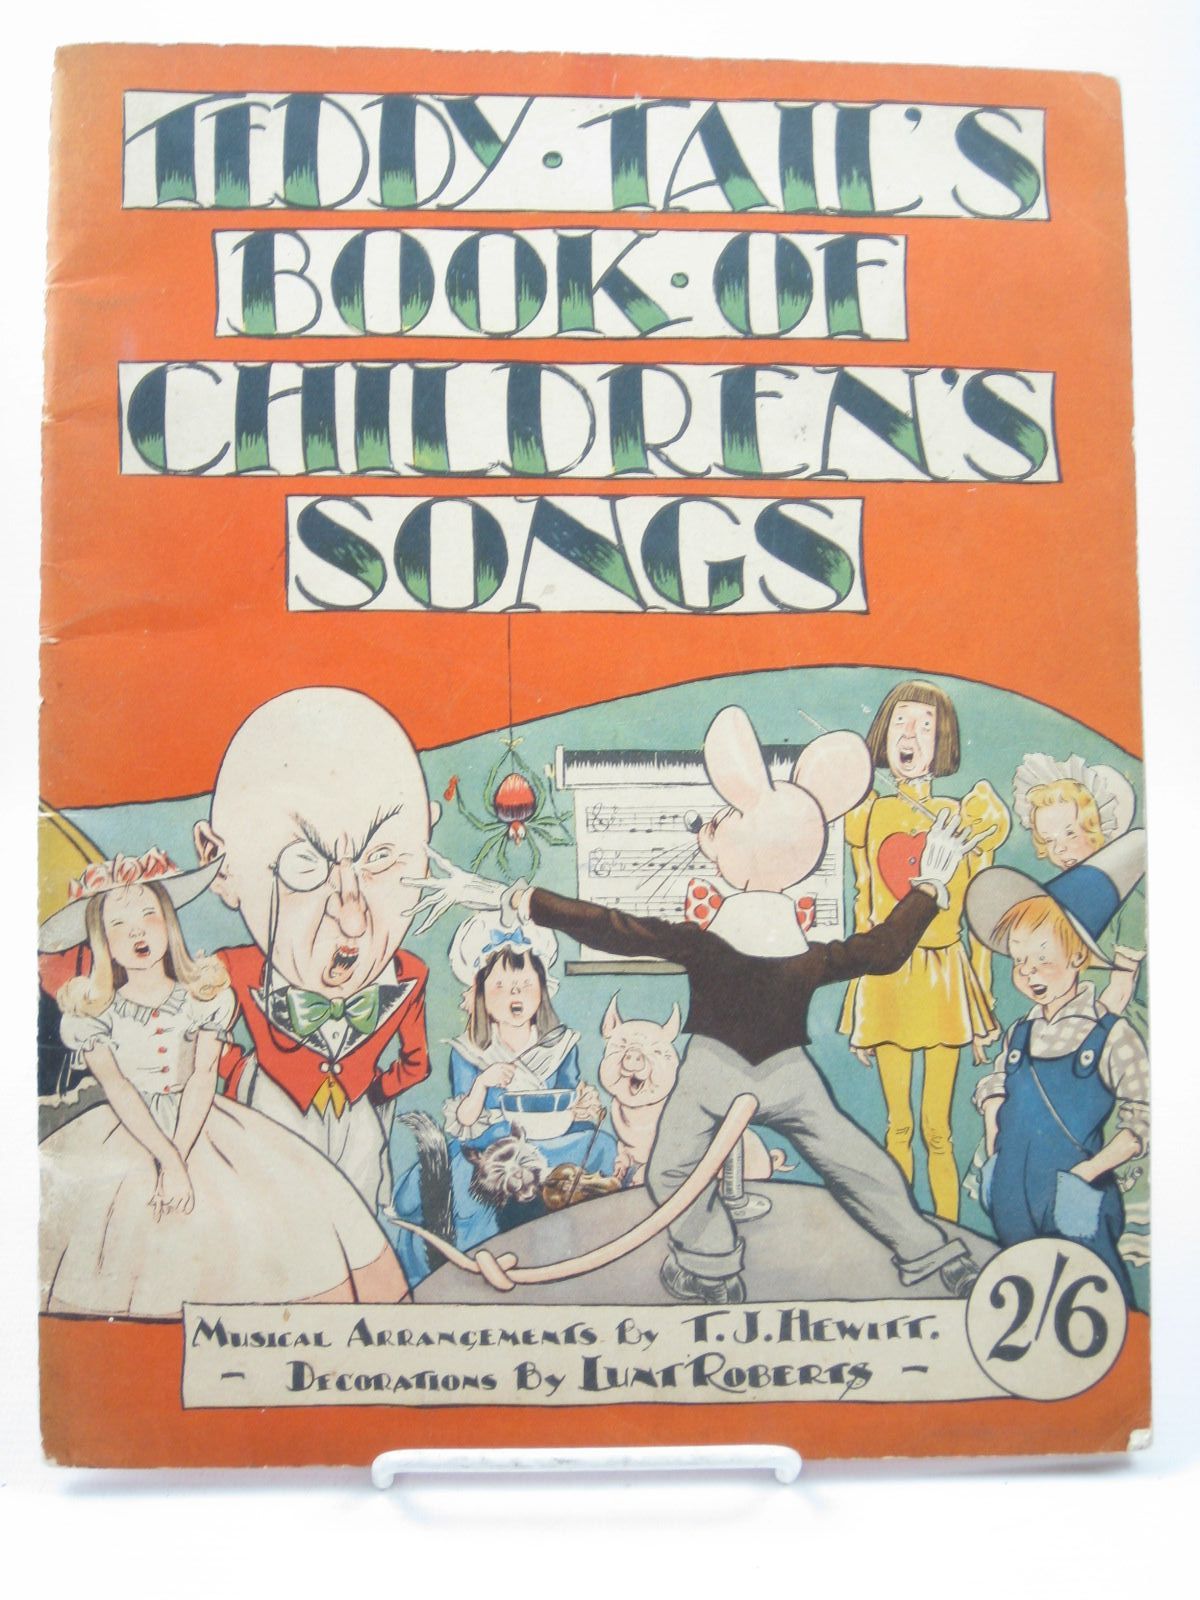 Photo of TEDDY TAIL'S BOOK OF CHILDREN'S SONGS written by Hewitt, T.J. illustrated by Roberts, Lunt published by Ken Publications (STOCK CODE: 1312188)  for sale by Stella & Rose's Books